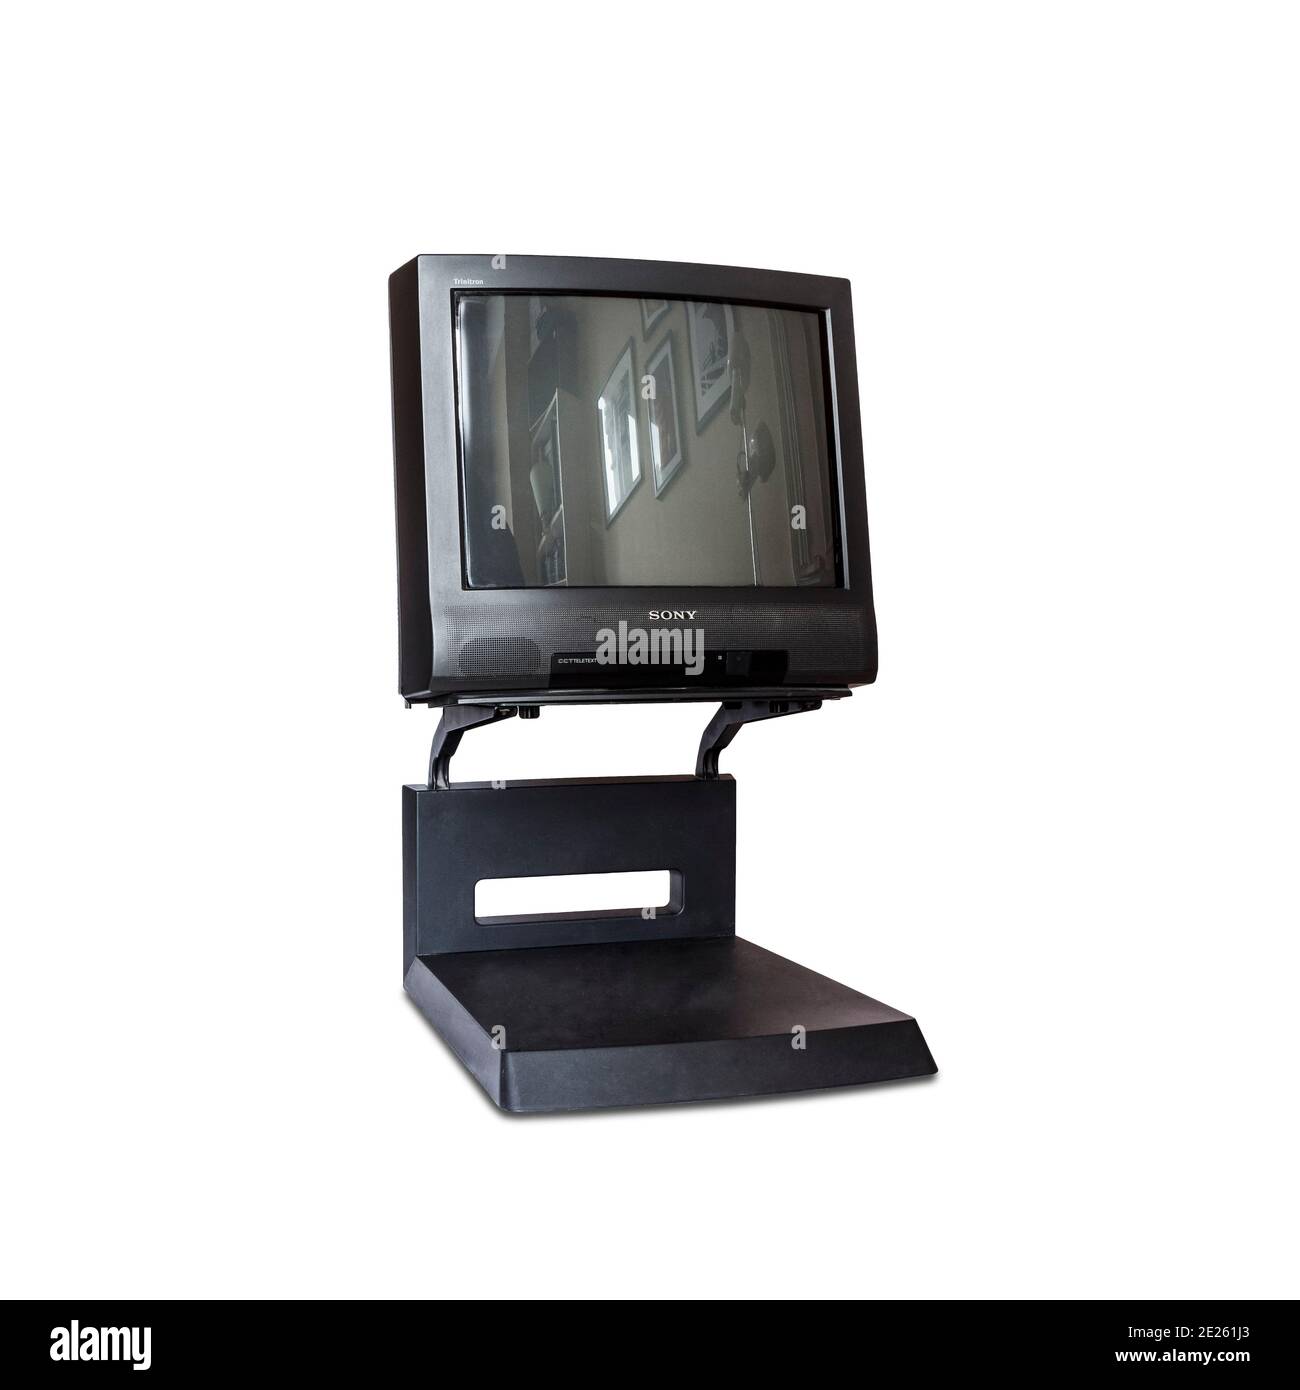 A 1996 black Sony Trinitron CRT television set on its stand, isolated against a white background Stock Photo